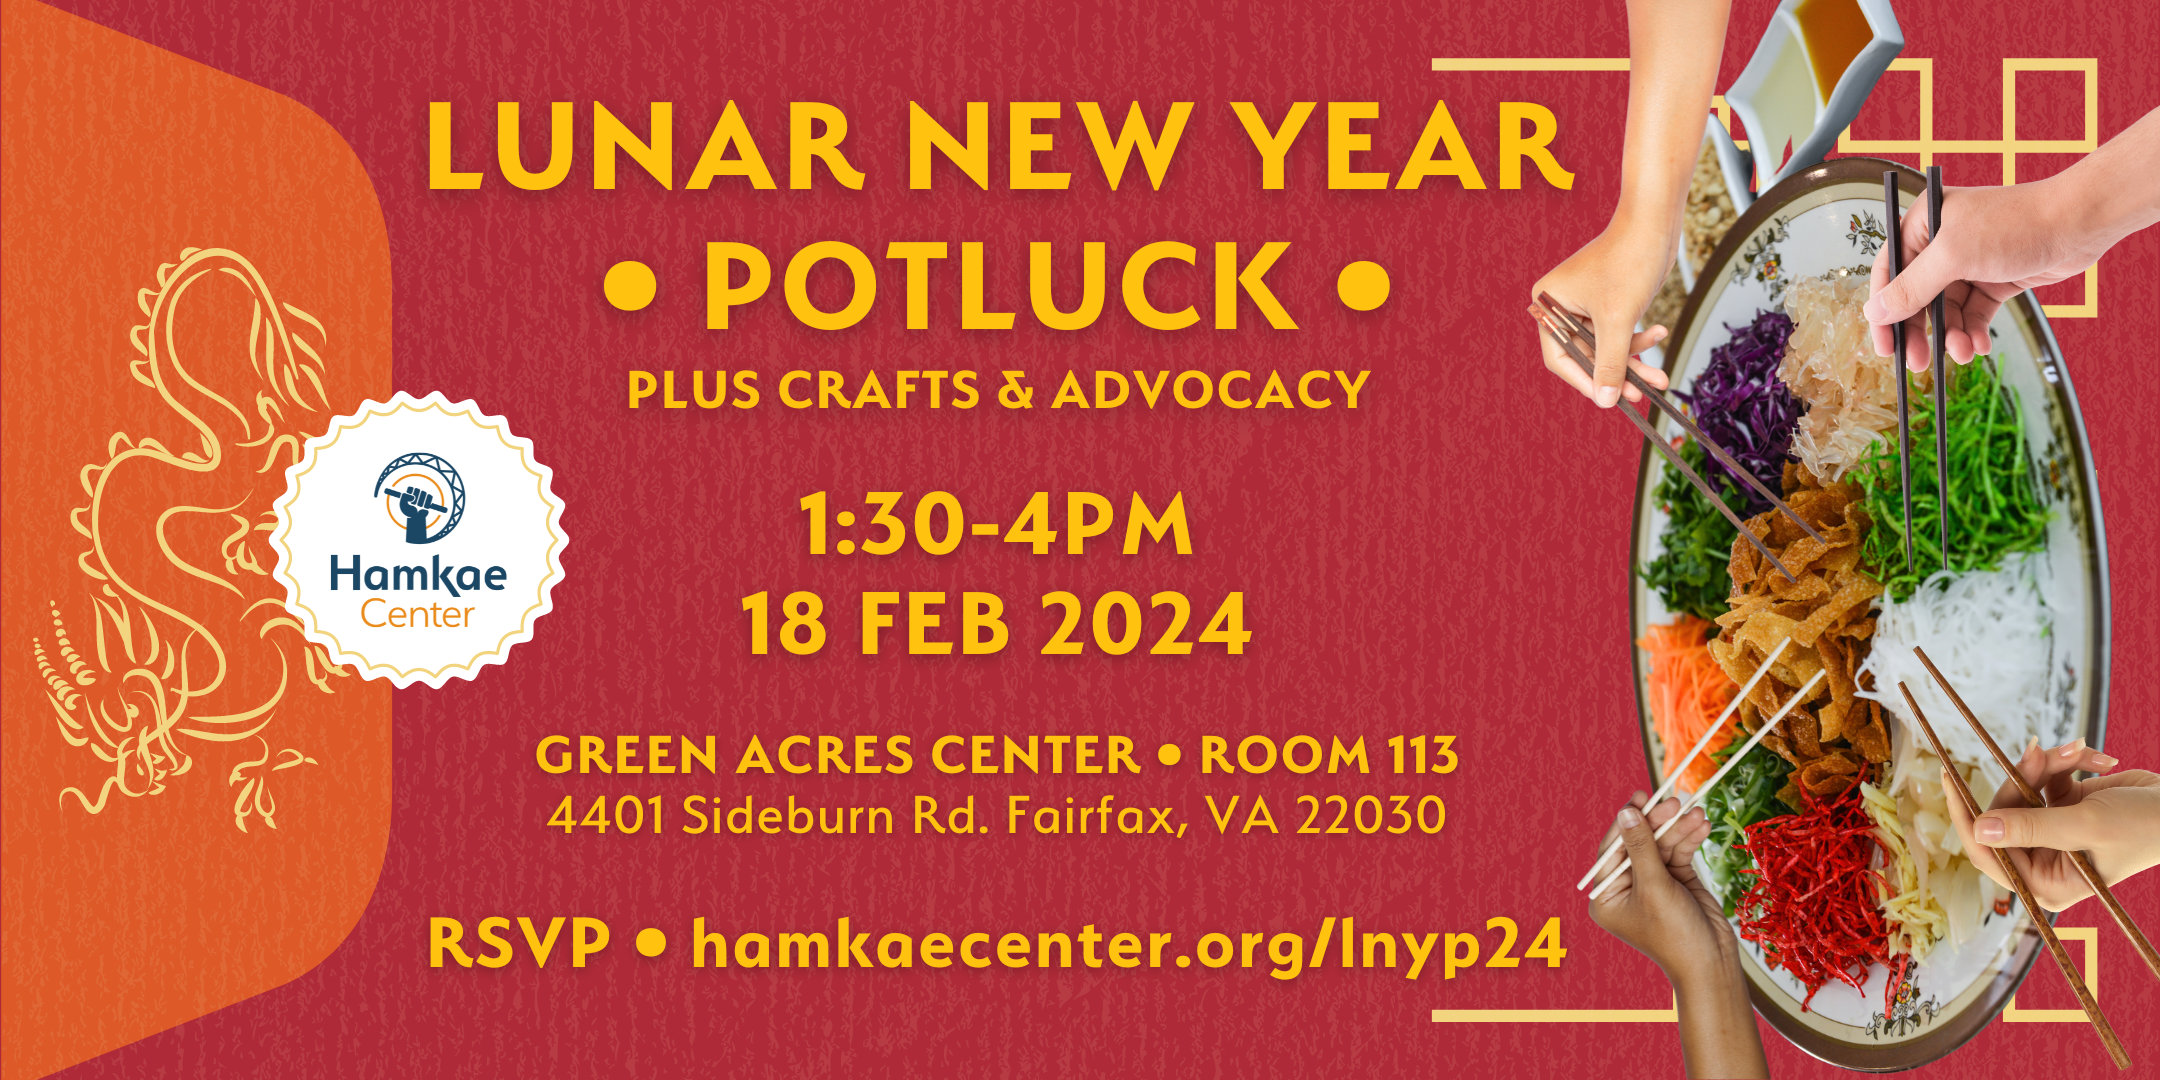 Lunar New Year Potluck, plus crafts & advocacy! 1:30-4pm; 18 Feb 2024 Green Acres Center; Room 113 (4401 Sideburn Rd. Fairfax, VA 22030) RSVP: hamkaecenter.org/lnyp24 Background of a long red envelope with a yellow dragon sketch on its flap, and a decorative yellow border near the bottom. Photo of a yee sang plate with sauces and toppings on the side, and 4 hands holding chopsticks hovering above the shredded vegetables, noodles, and fruits.